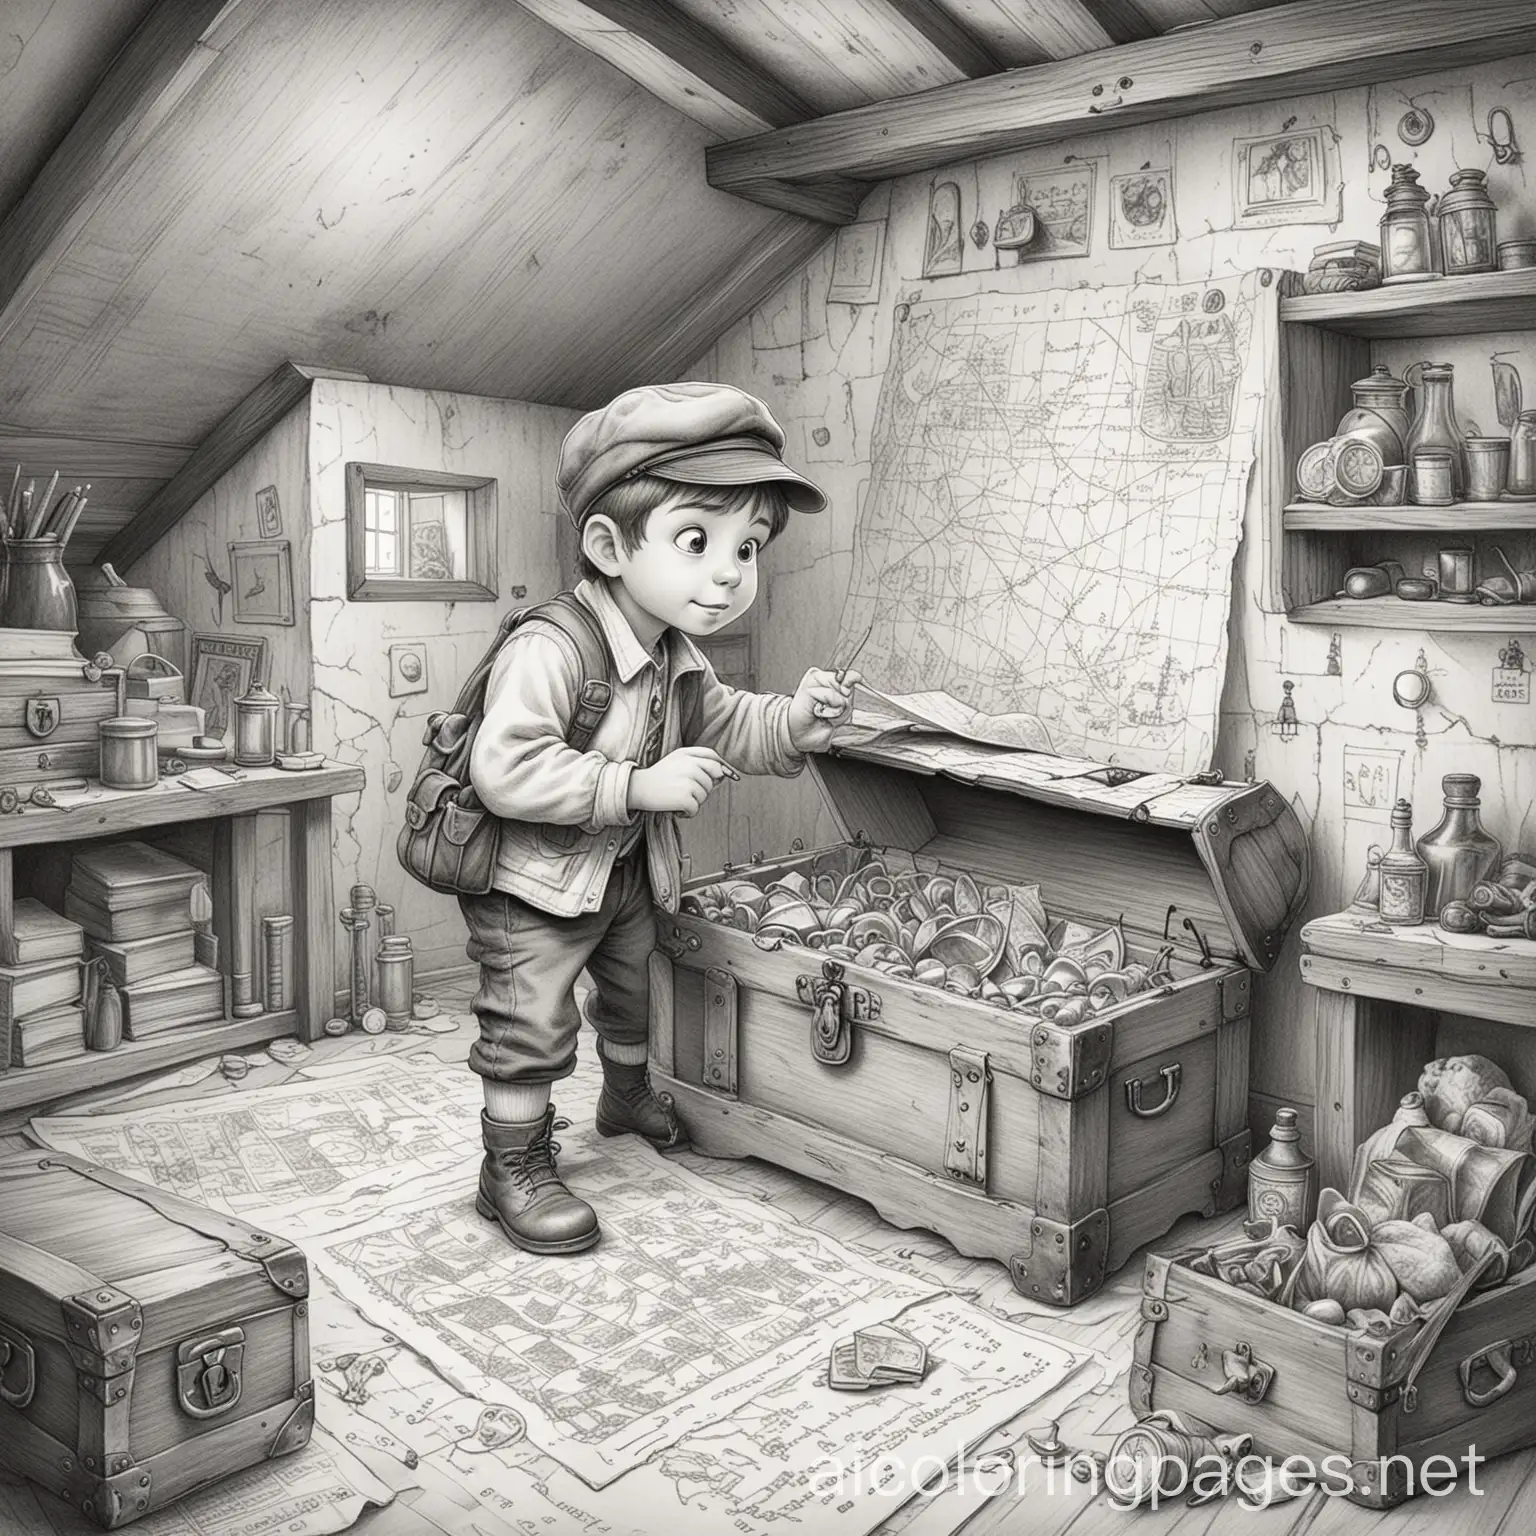 Kid-Detective-Holding-Treasure-Map-in-Attic-Setting-Coloring-Page